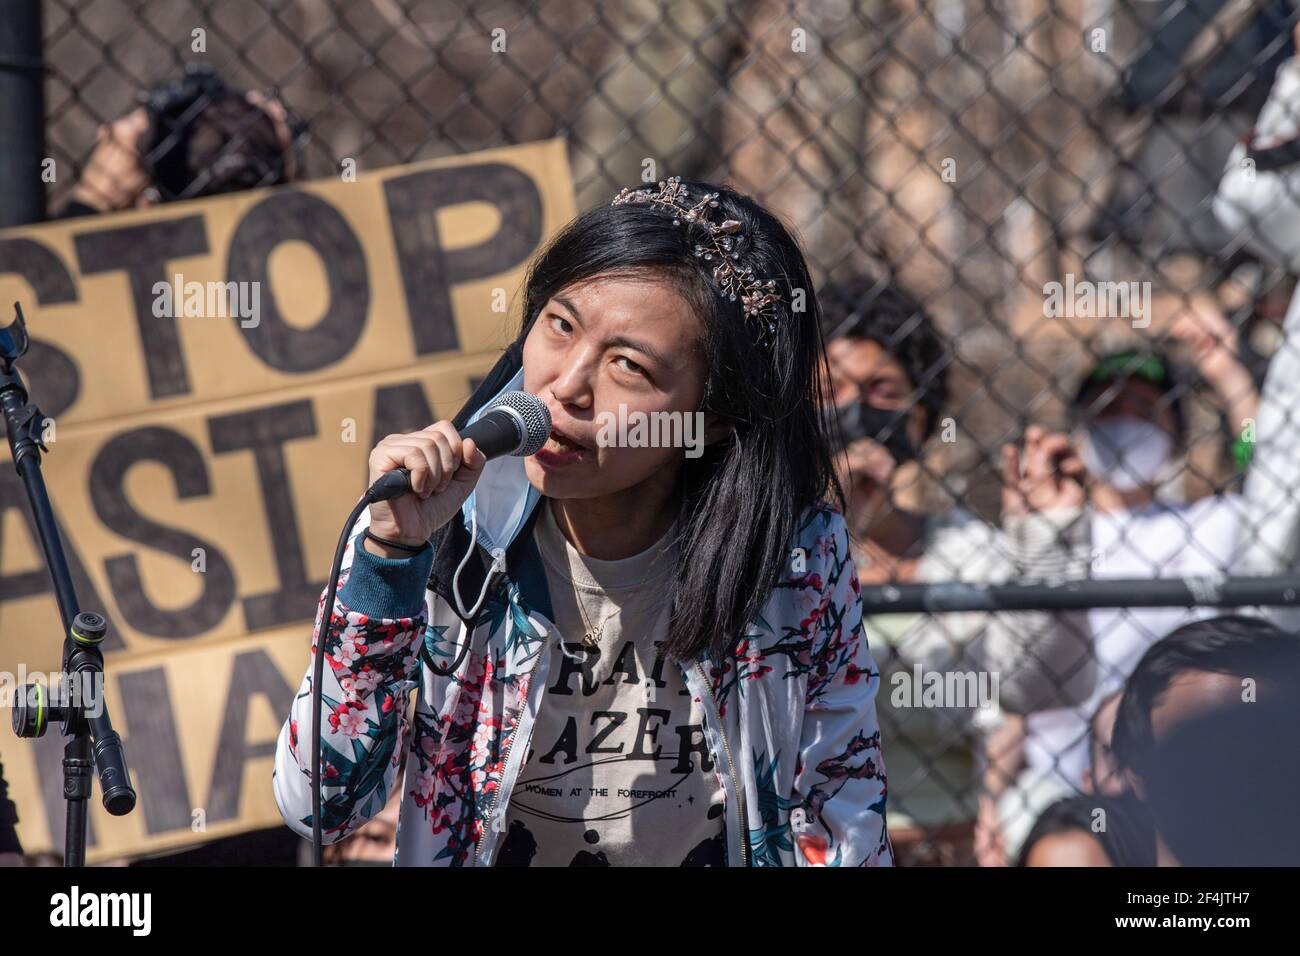 New York, United States. 21st Mar, 2021. Alice Tsui speaks during a rally against hate in Columbus Park in the Chinatown neighbourhood of Manhattan in New York City.A rally for solidarity was organized in response to a rise in hate crimes against the Asian community since the start of the coronavirus (COVID-19) pandemic in 2020. On March 16 in Atlanta, Georgia, a man went on a shooting spree in three spas that left eight people dead, including six Asian women. Credit: SOPA Images Limited/Alamy Live News Stock Photo